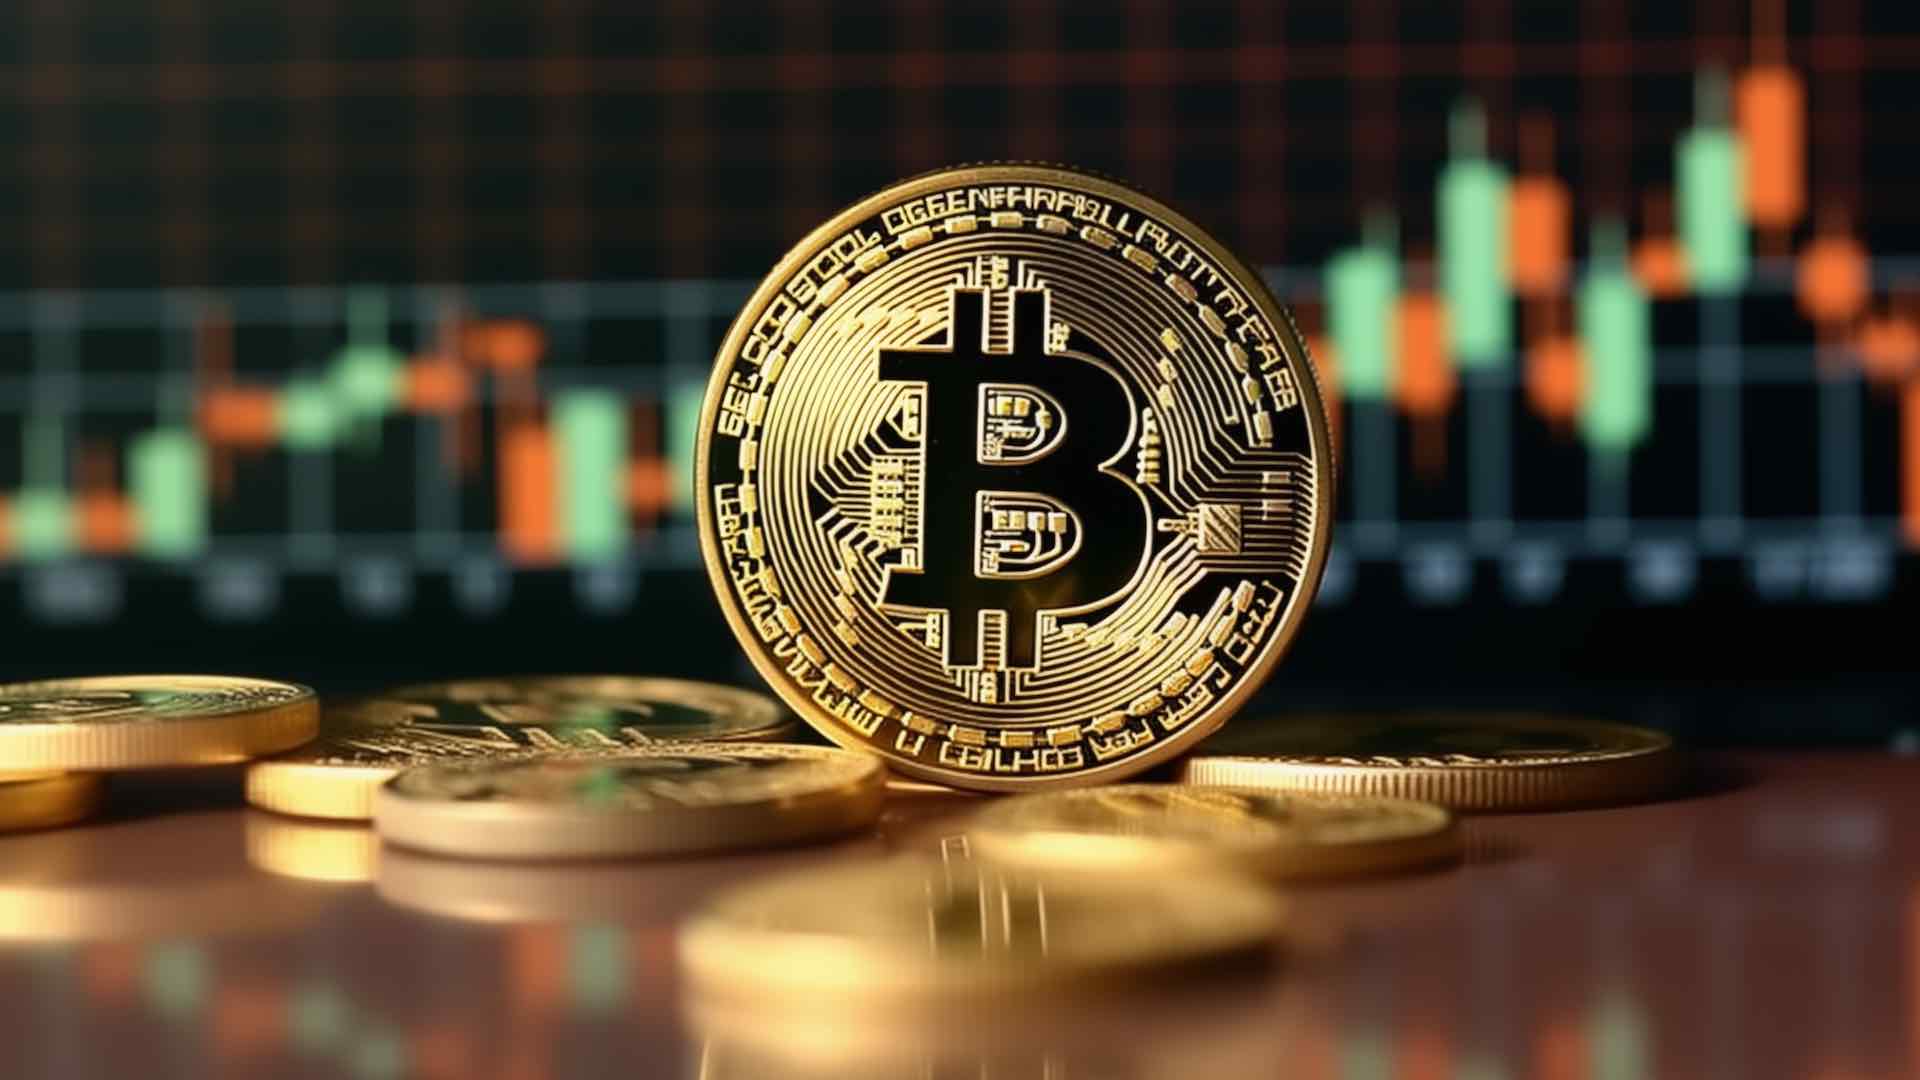 Bitcoin faced a downturn early Monday, slipping below the $70,000 mark as volatility surged in anticipation of this month's looming block reward halving. Currently trading at around $69,565, Bitcoin experienced a 1.1% dip within the day, according to data from CoinGecko. Despite this, it retains a nearly 4% increase over the week. As the Bitcoin halving approaches, a key indicator of the cryptocurrency's volatility has witnessed a notable spike. Bitcoin's 30-day annualized realized volatility peaked at 63.76% last week, maintaining levels above 60% as per Glassnode data.

This surge marks its highest point since August 2022. Realized volatility, measuring the standard deviation in returns over a specified period, reflects heightened price risk during this time frame. Late in March, Beam CEO Andy Bromberg suggested that the recent volatility in Bitcoin signifies a "crisis of faith" among traders ahead of the block reward halving event. Scheduled every four years, the Bitcoin halving involves cutting the block reward allocated to miners by half, effectively managing the distribution of its fixed 21 million supply.

The upcoming 2024 halving will reduce mining rewards from 6.25 BTC to 3.125 BTC. While historical trends suggest a surge in Bitcoin's price following each halving, analysts caution that such expectations may already be factored into the market. Additionally, a recent Coinbase report highlights that previous price rallies correlated with broader macroeconomic events like the COVID-19 pandemic and resulting fiscal stimulus measures. The 2024 halving stands out due to Bitcoin's price hitting an all-time high ahead of the event. Propelled by the approval of several U.S. spot Bitcoin ETFs in January, these funds absorbed Bitcoin from the market.

In the lead-up to the halving event, where the production of new Bitcoin is poised to decline, the resultant dynamic could pave the way for a shortage in available Bitcoin across the market. This scarcity, identified and favorably regarded by certain analysts, carries significant implications. It suggests an impending imbalance between supply and demand, wherein the anticipated reduction in supply intersects with potential heightened demand. Consequently, this imbalance may catalyze an upward trajectory in Bitcoin prices, buoying a bullish sentiment among investors as they anticipate the halving's impact on the cryptocurrency's supply-demand dynamics and its subsequent influence on market trends.